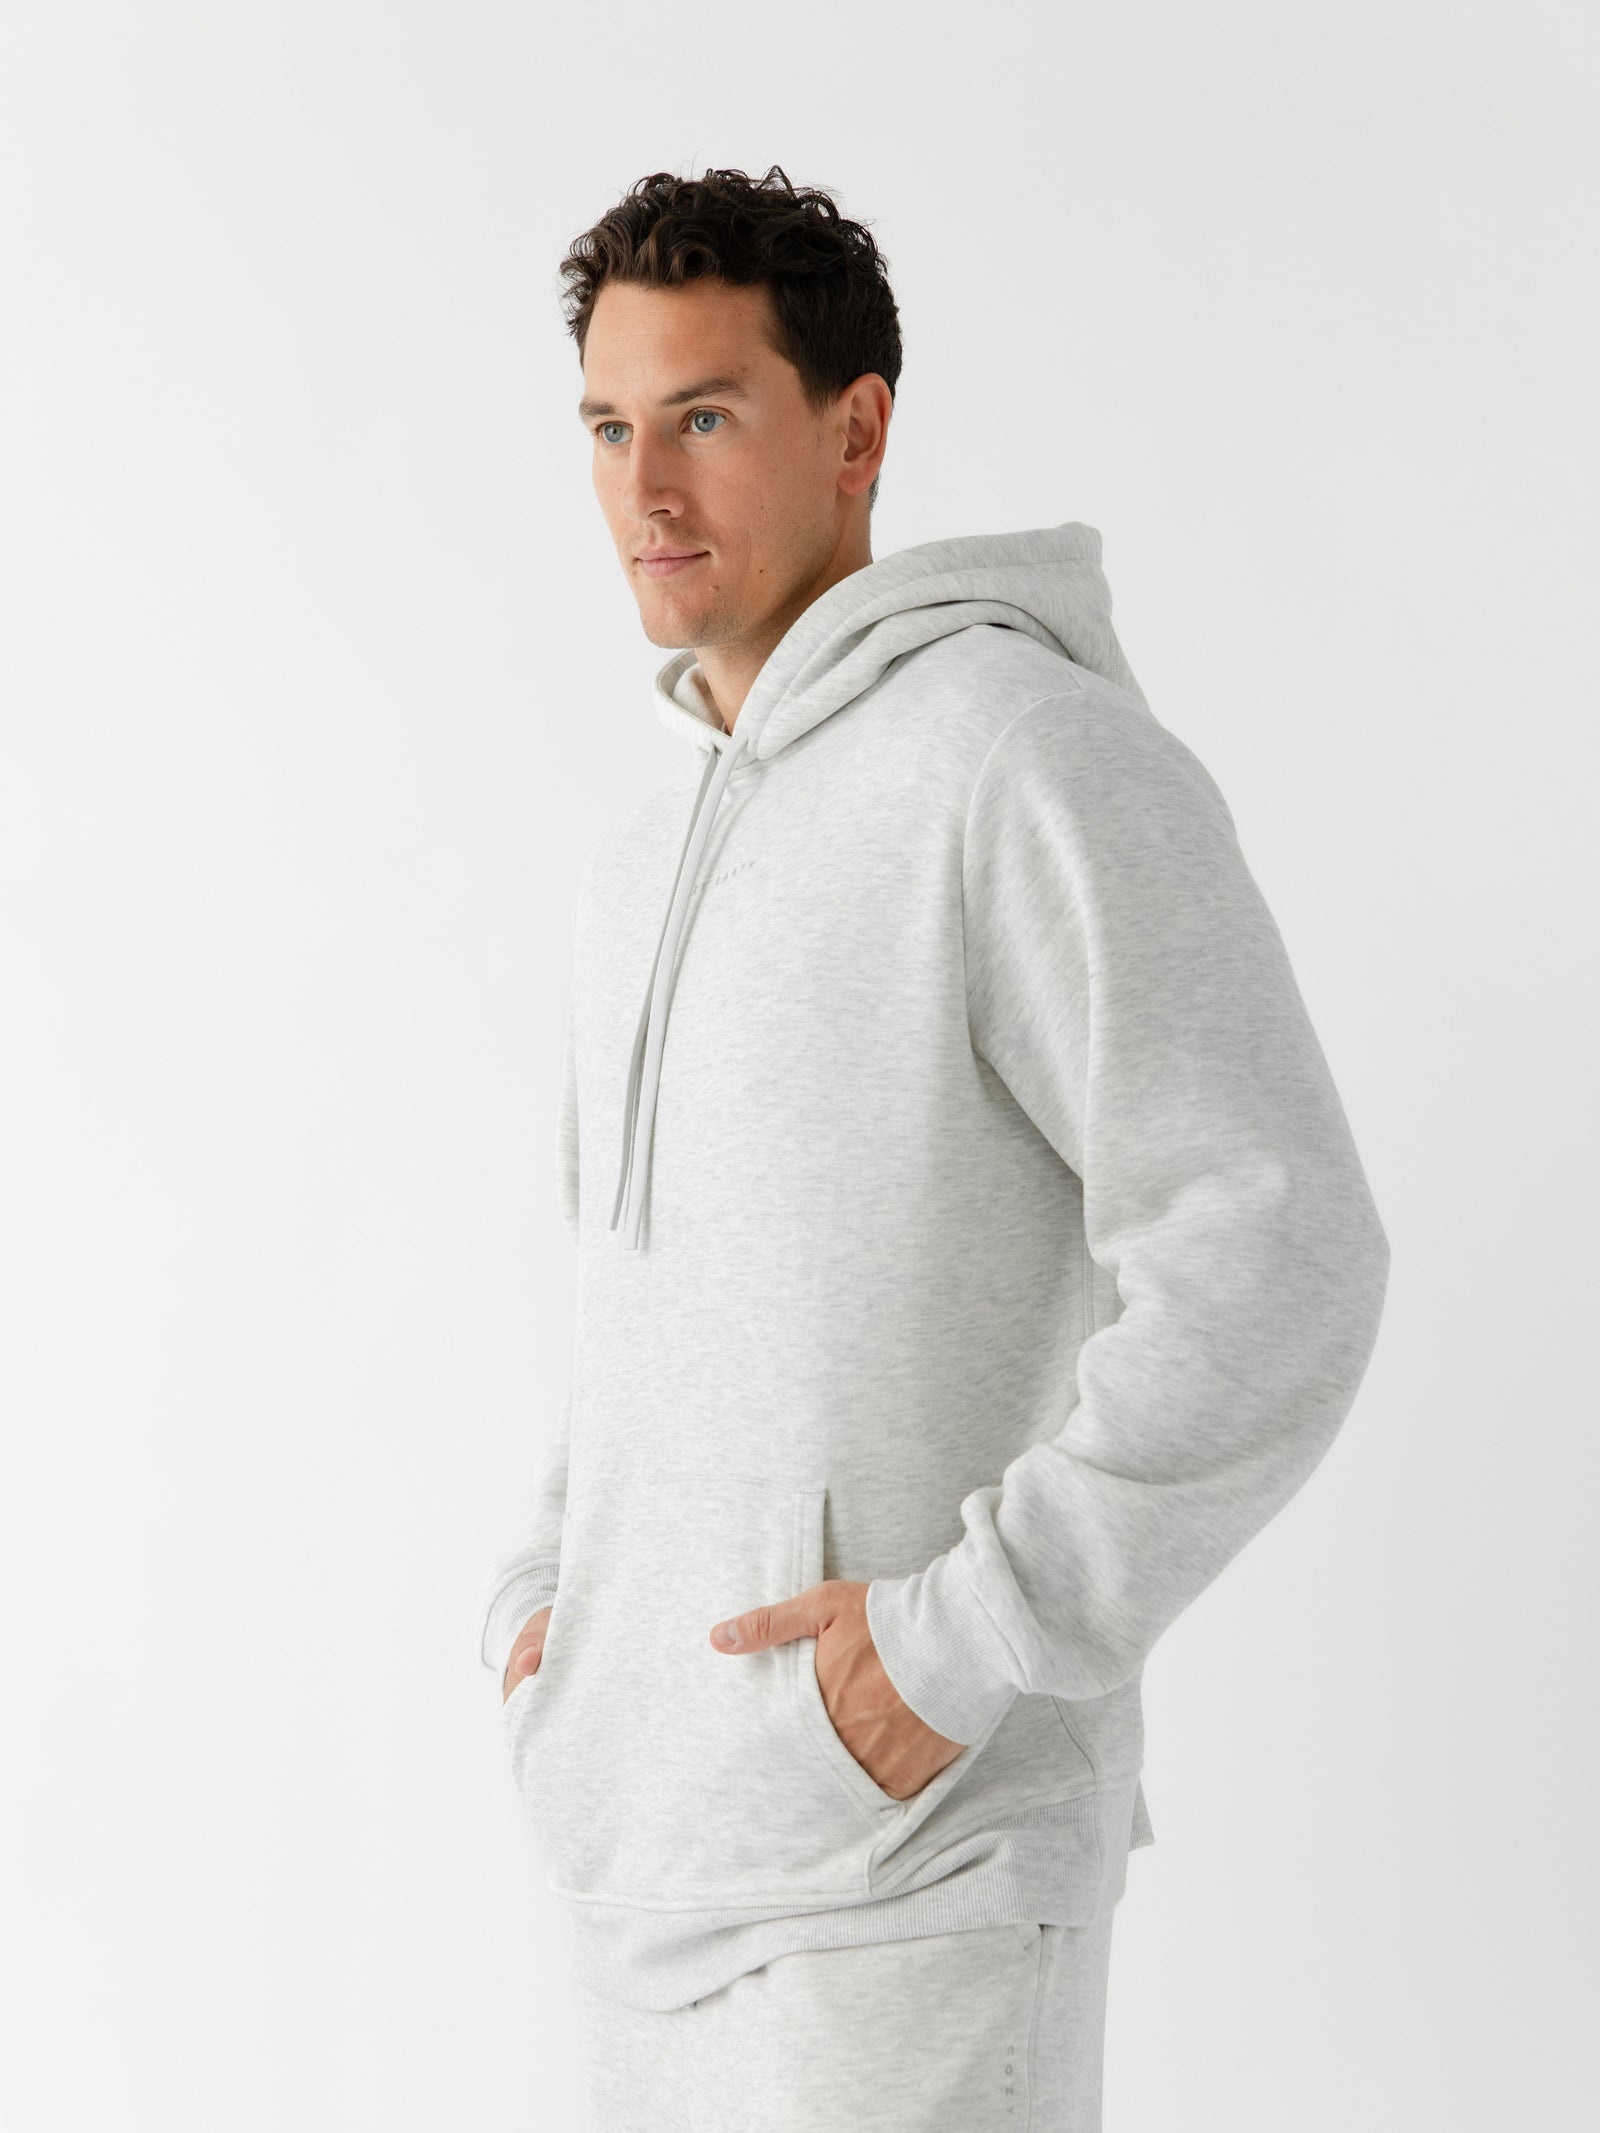 Man wearing heather grey cityscape hoodie with white background 